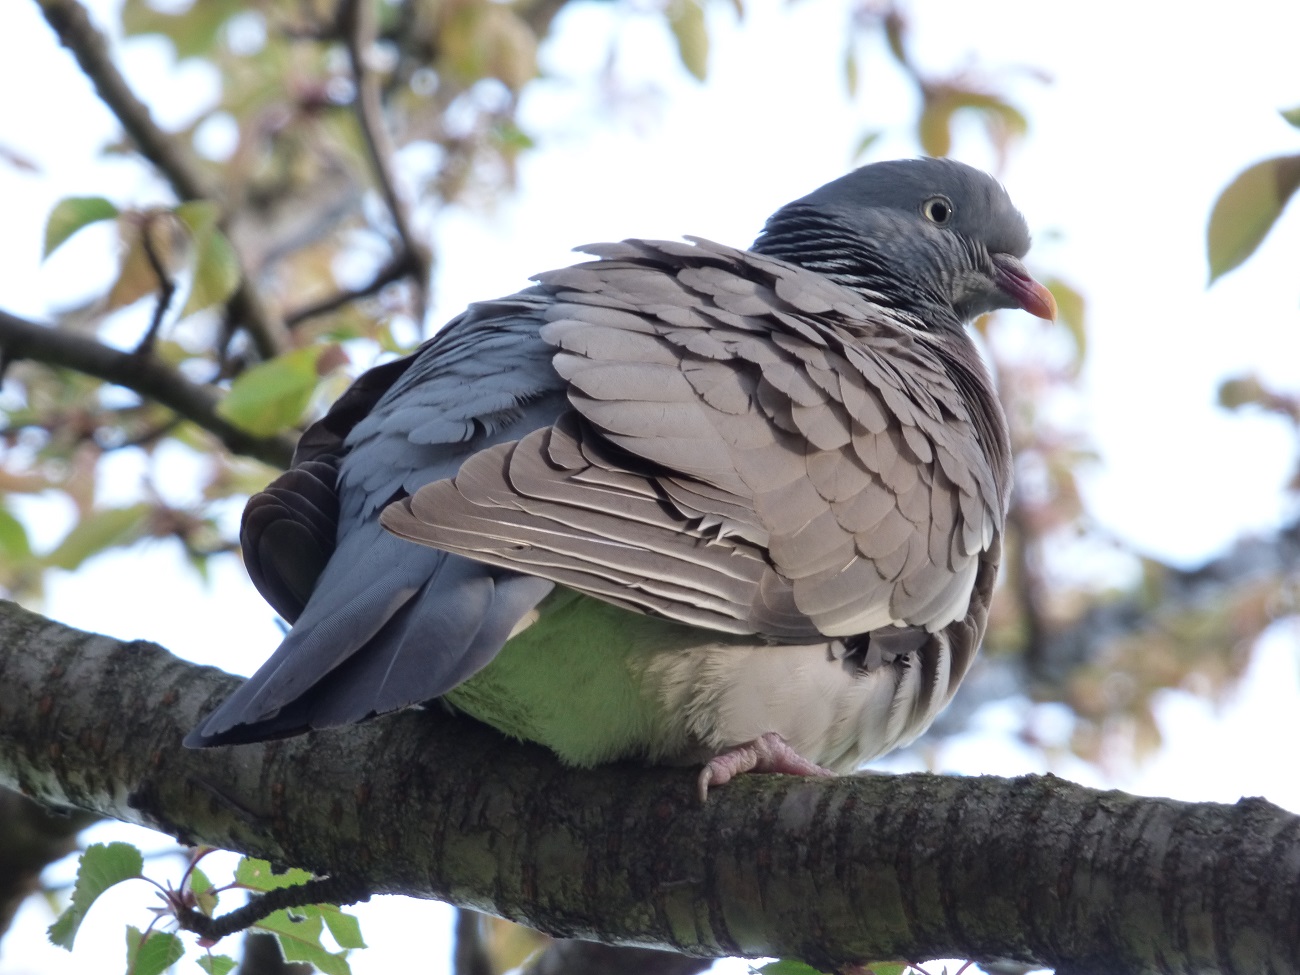 20160423_Tower-Hamlets_Carlton-Square_Perched-Pigeon